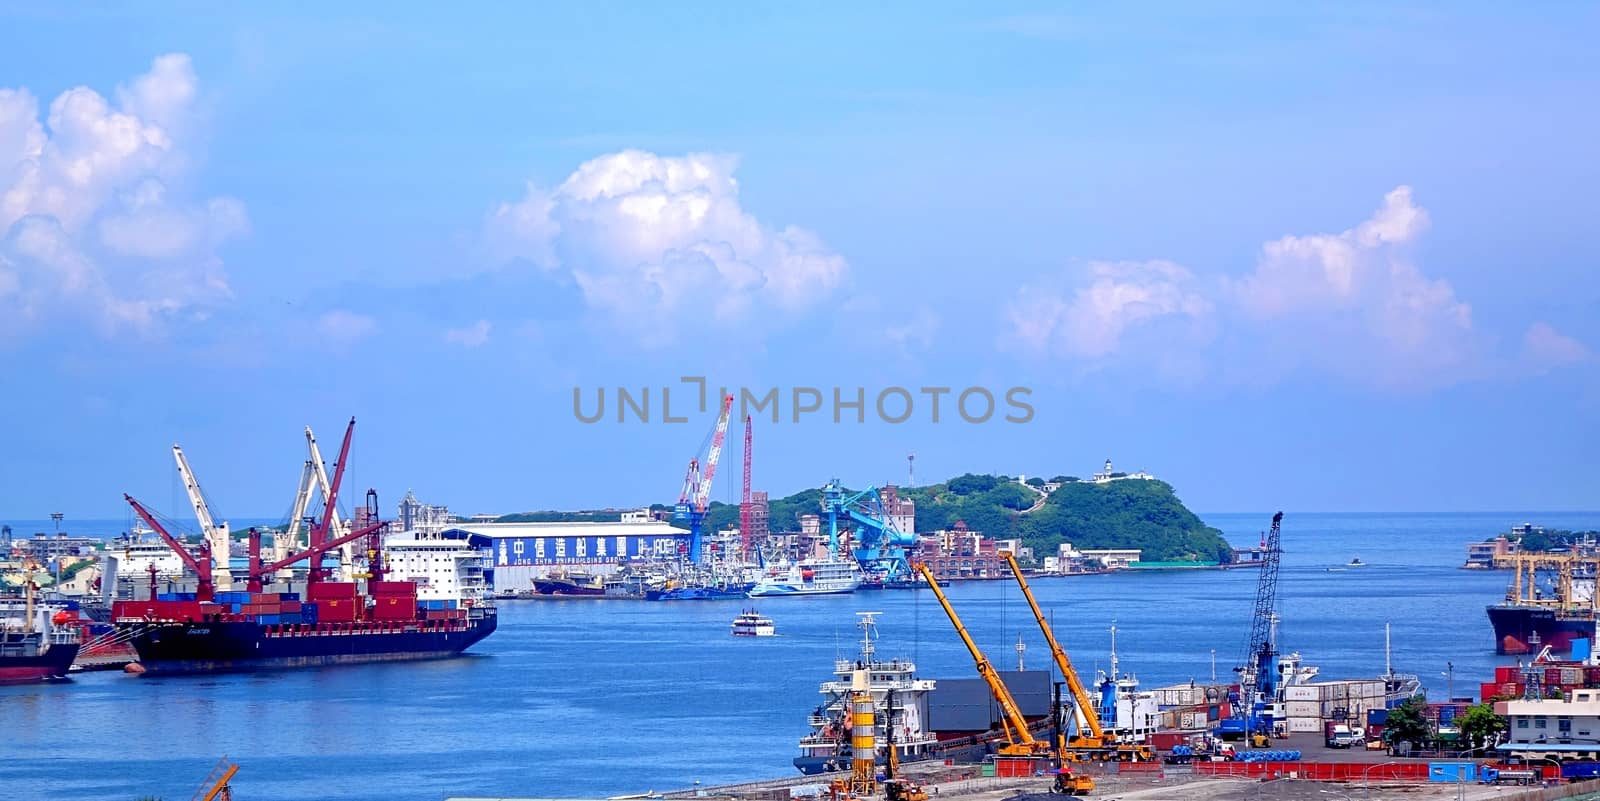 KAOHSIUNG, TAIWAN -- JUNE 11, 2015: A view of the entrance to Kaohsiung Harbor with the old Chijin lighthouse on the back.
